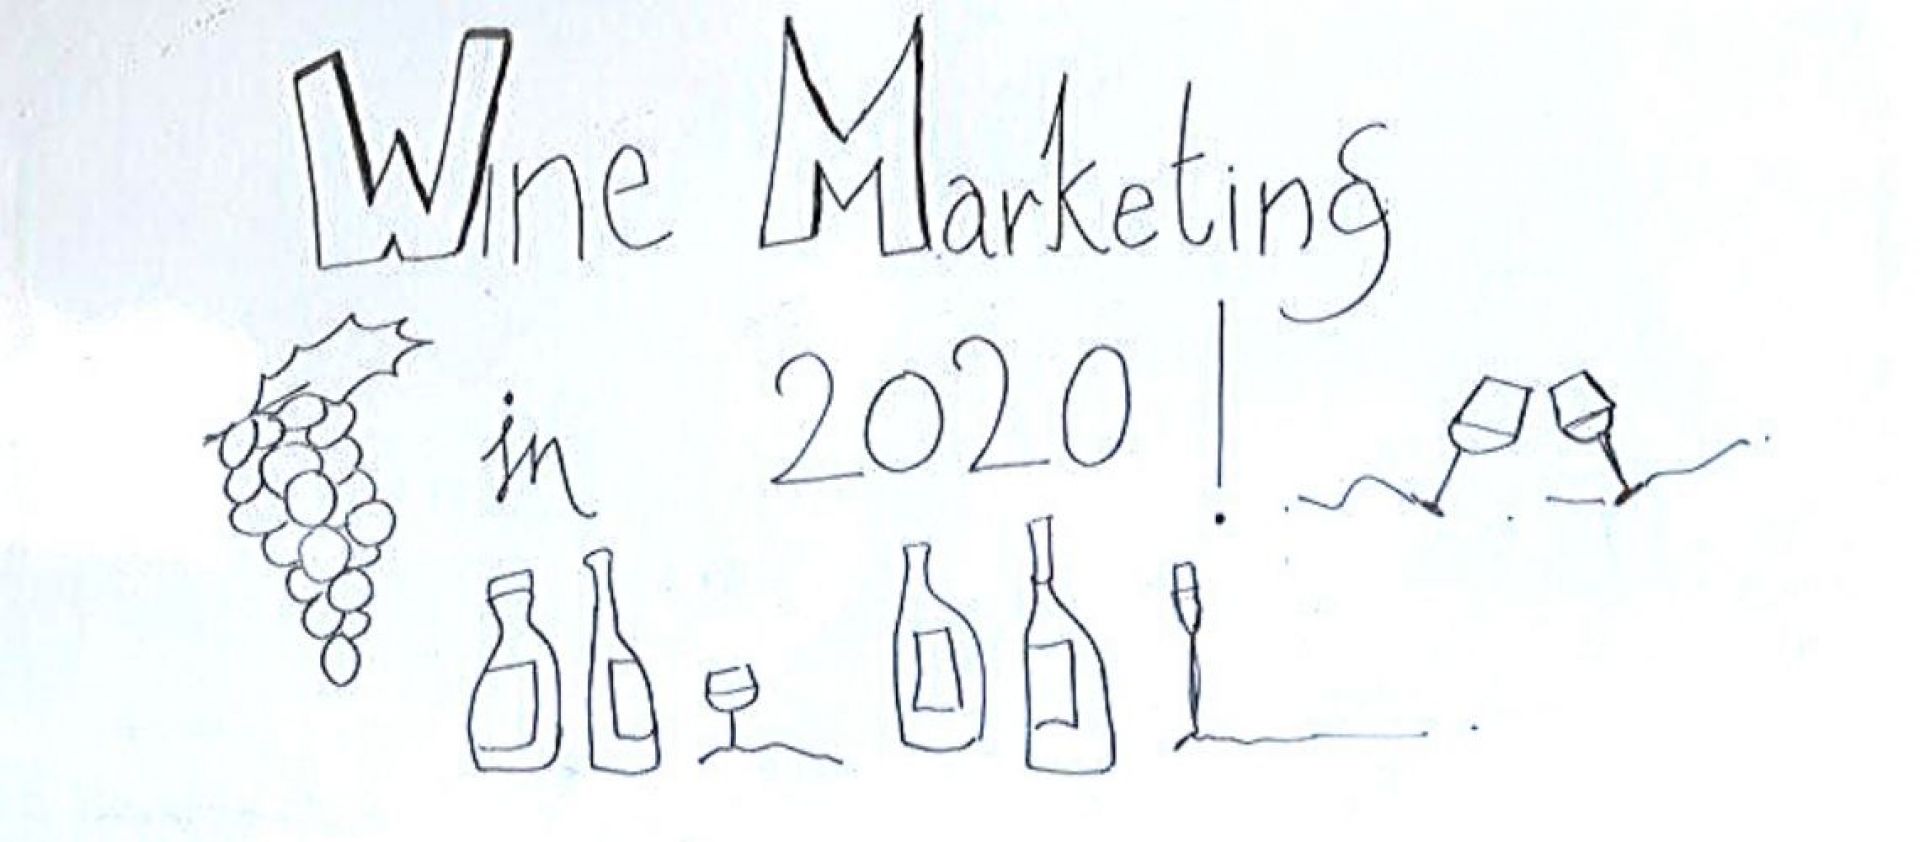 Photo for: Wine Marketing Trends To Look Out For In 2020